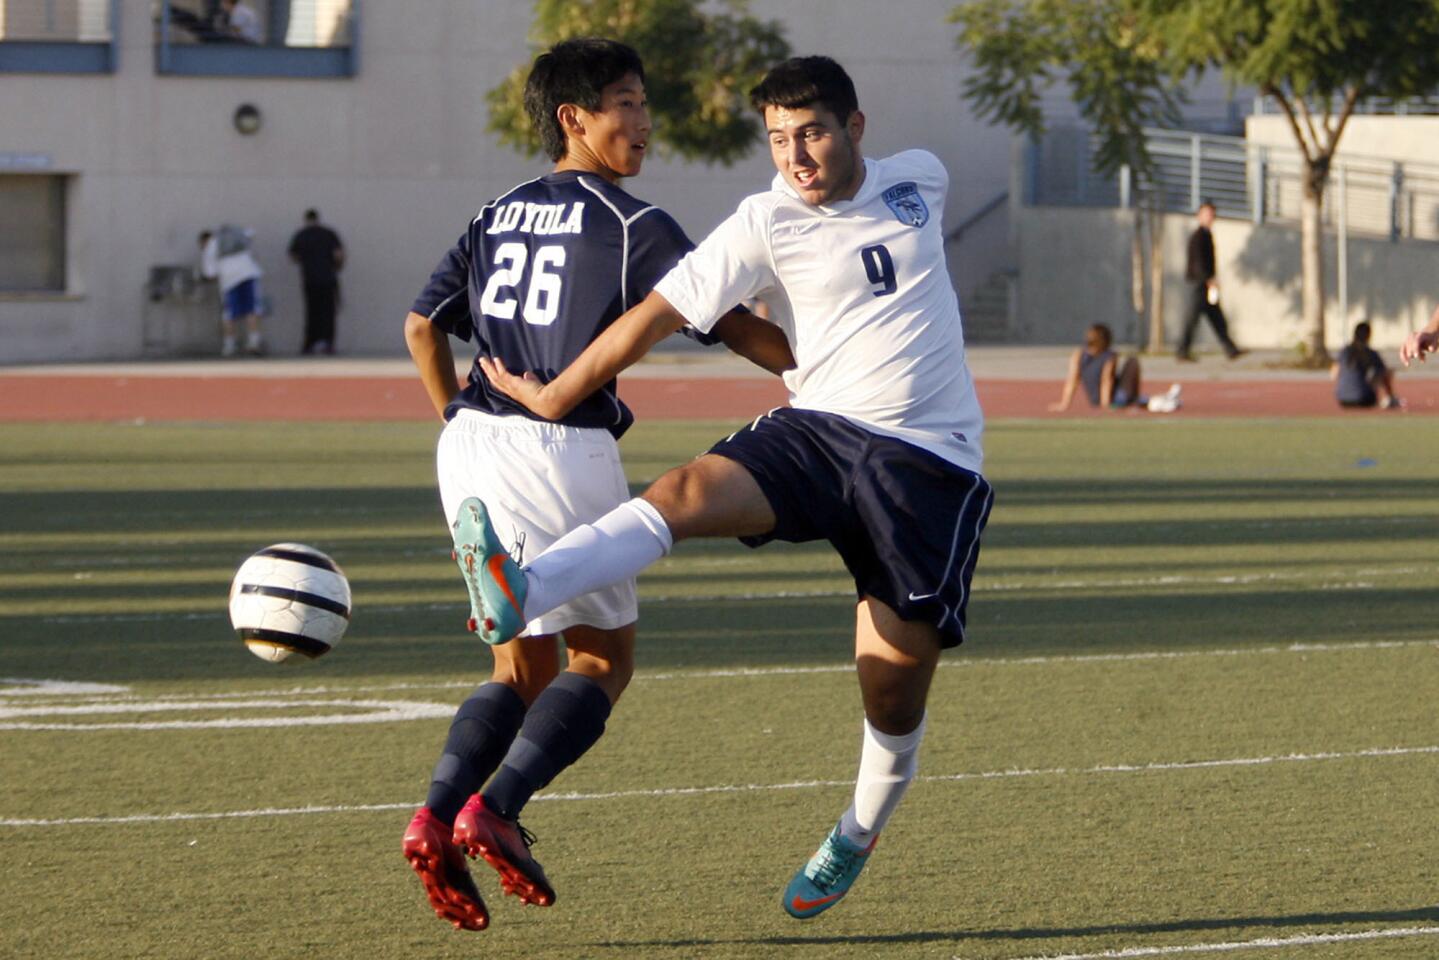 Loyola's Matthew Koh, left, and CV's Eric Keshishian fight for the ball during a game at Crescenta Valley High School on Tuesday, December 11, 2012.